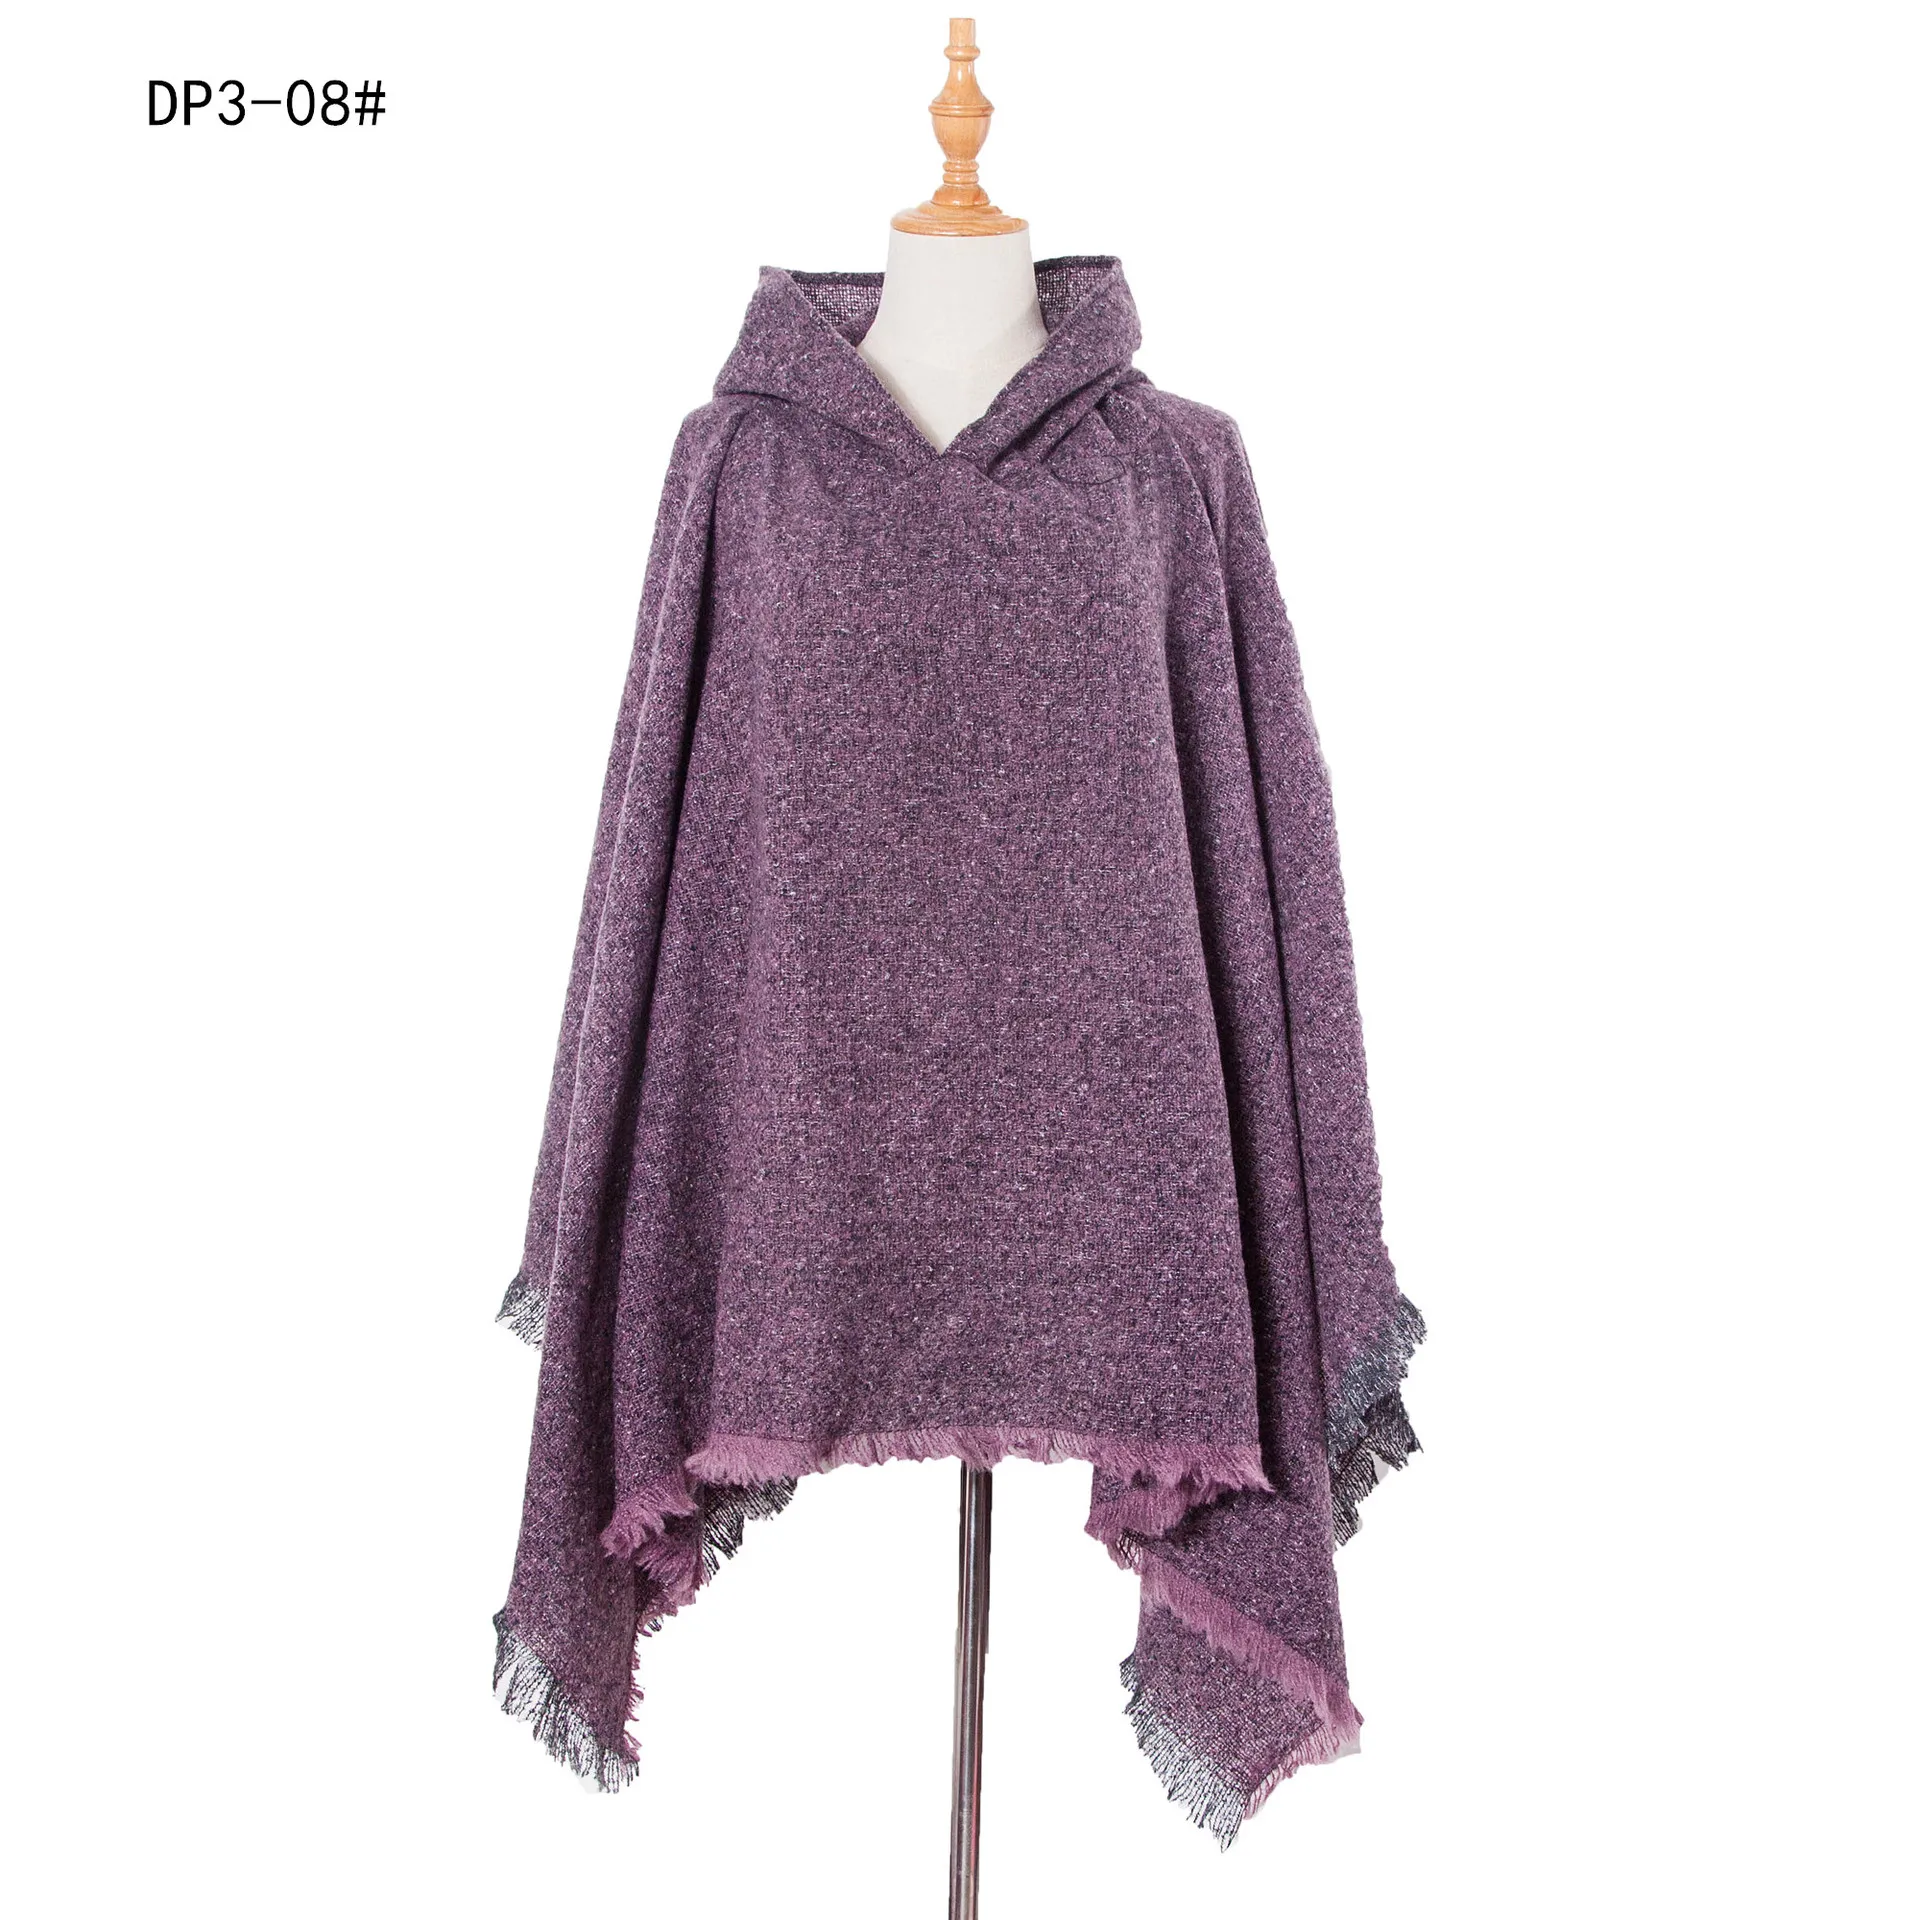 

Autumn Winter New Loop Yarn Hooded Pullover Tourism Solid Color Cape Women Fashion Street Poncho Lady Capes Purple Cloaks